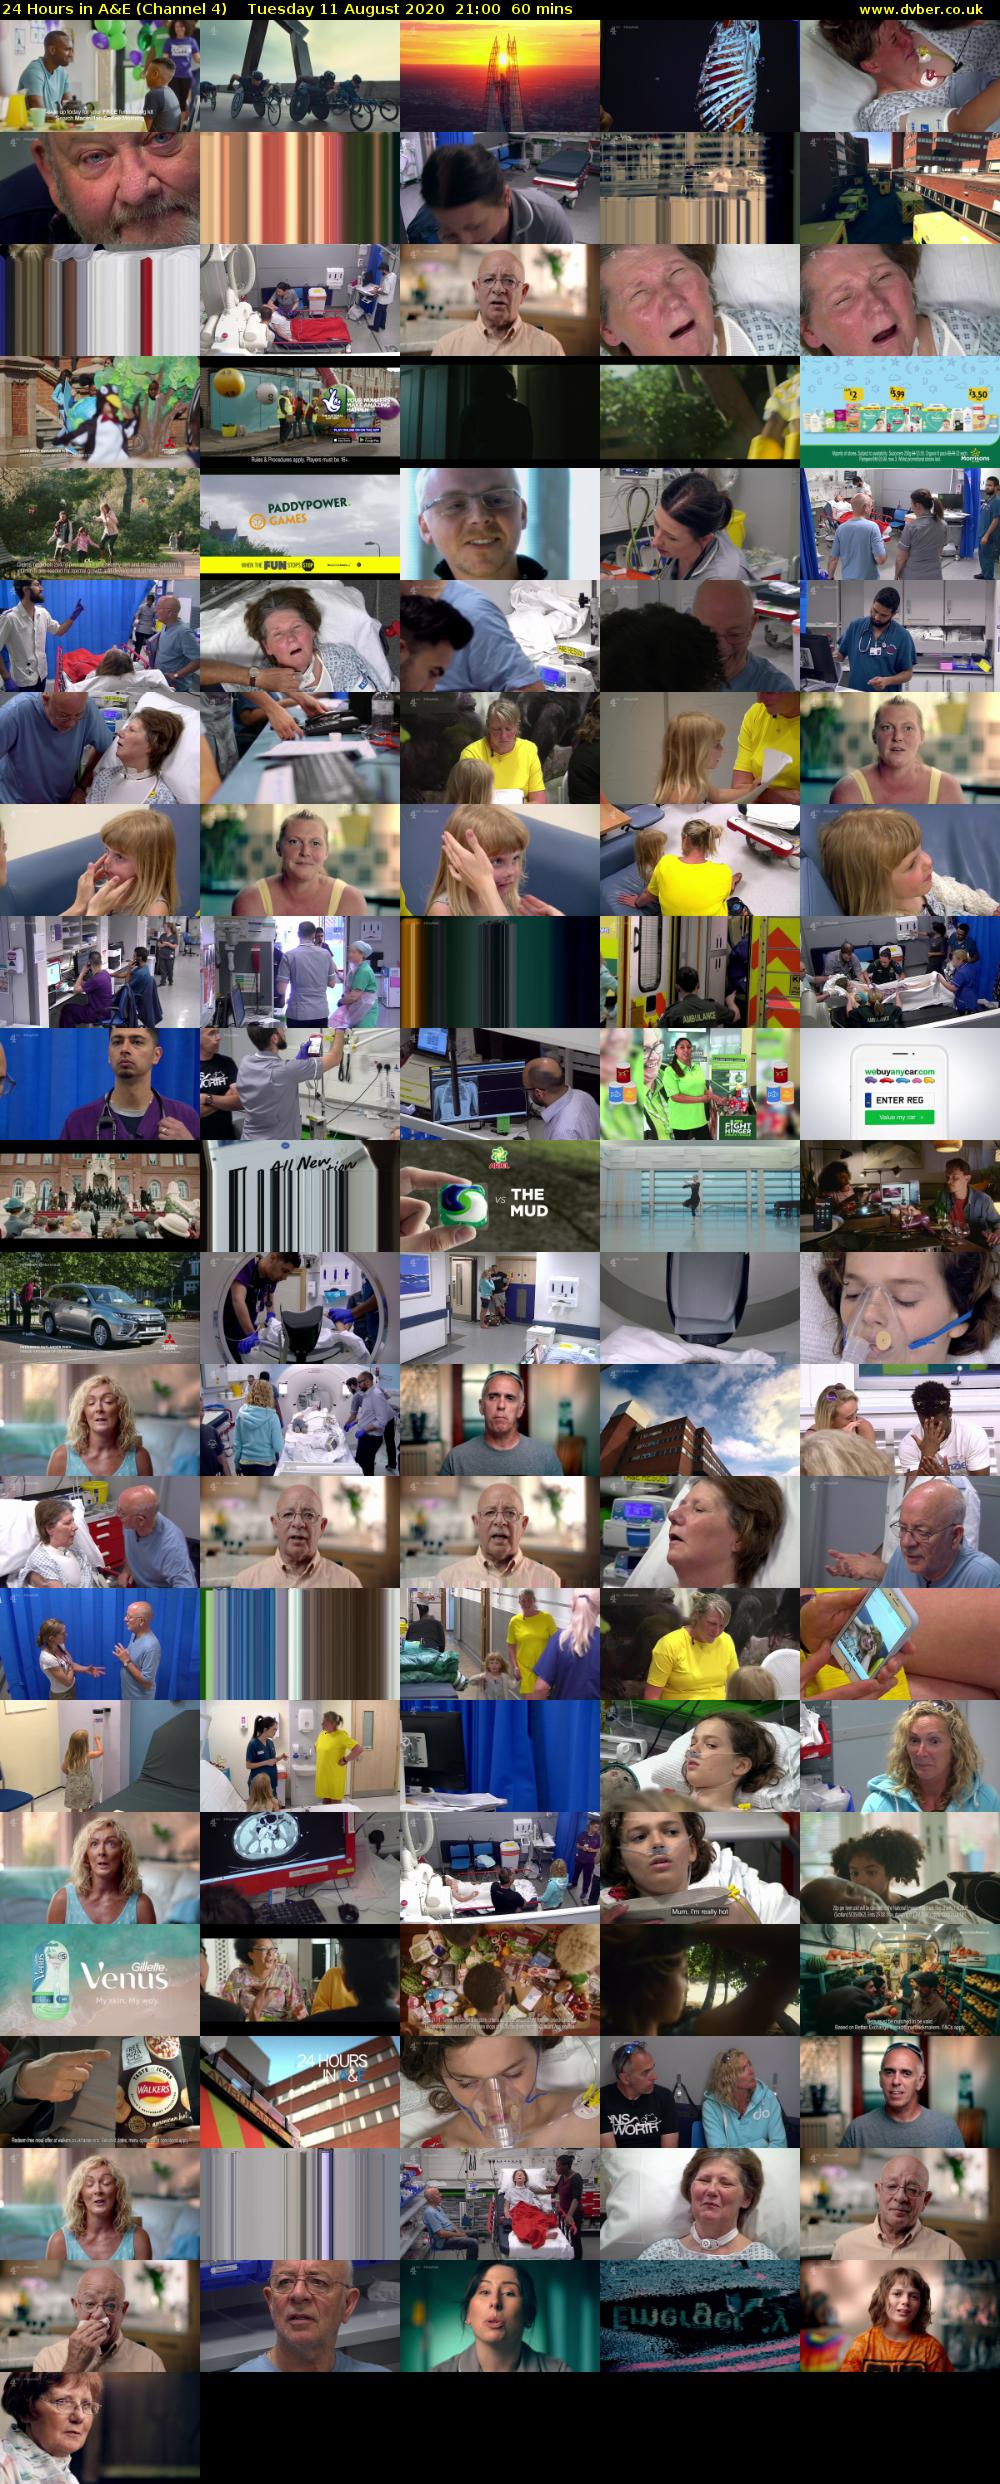 24 Hours in A&E (Channel 4) Tuesday 11 August 2020 21:00 - 22:00